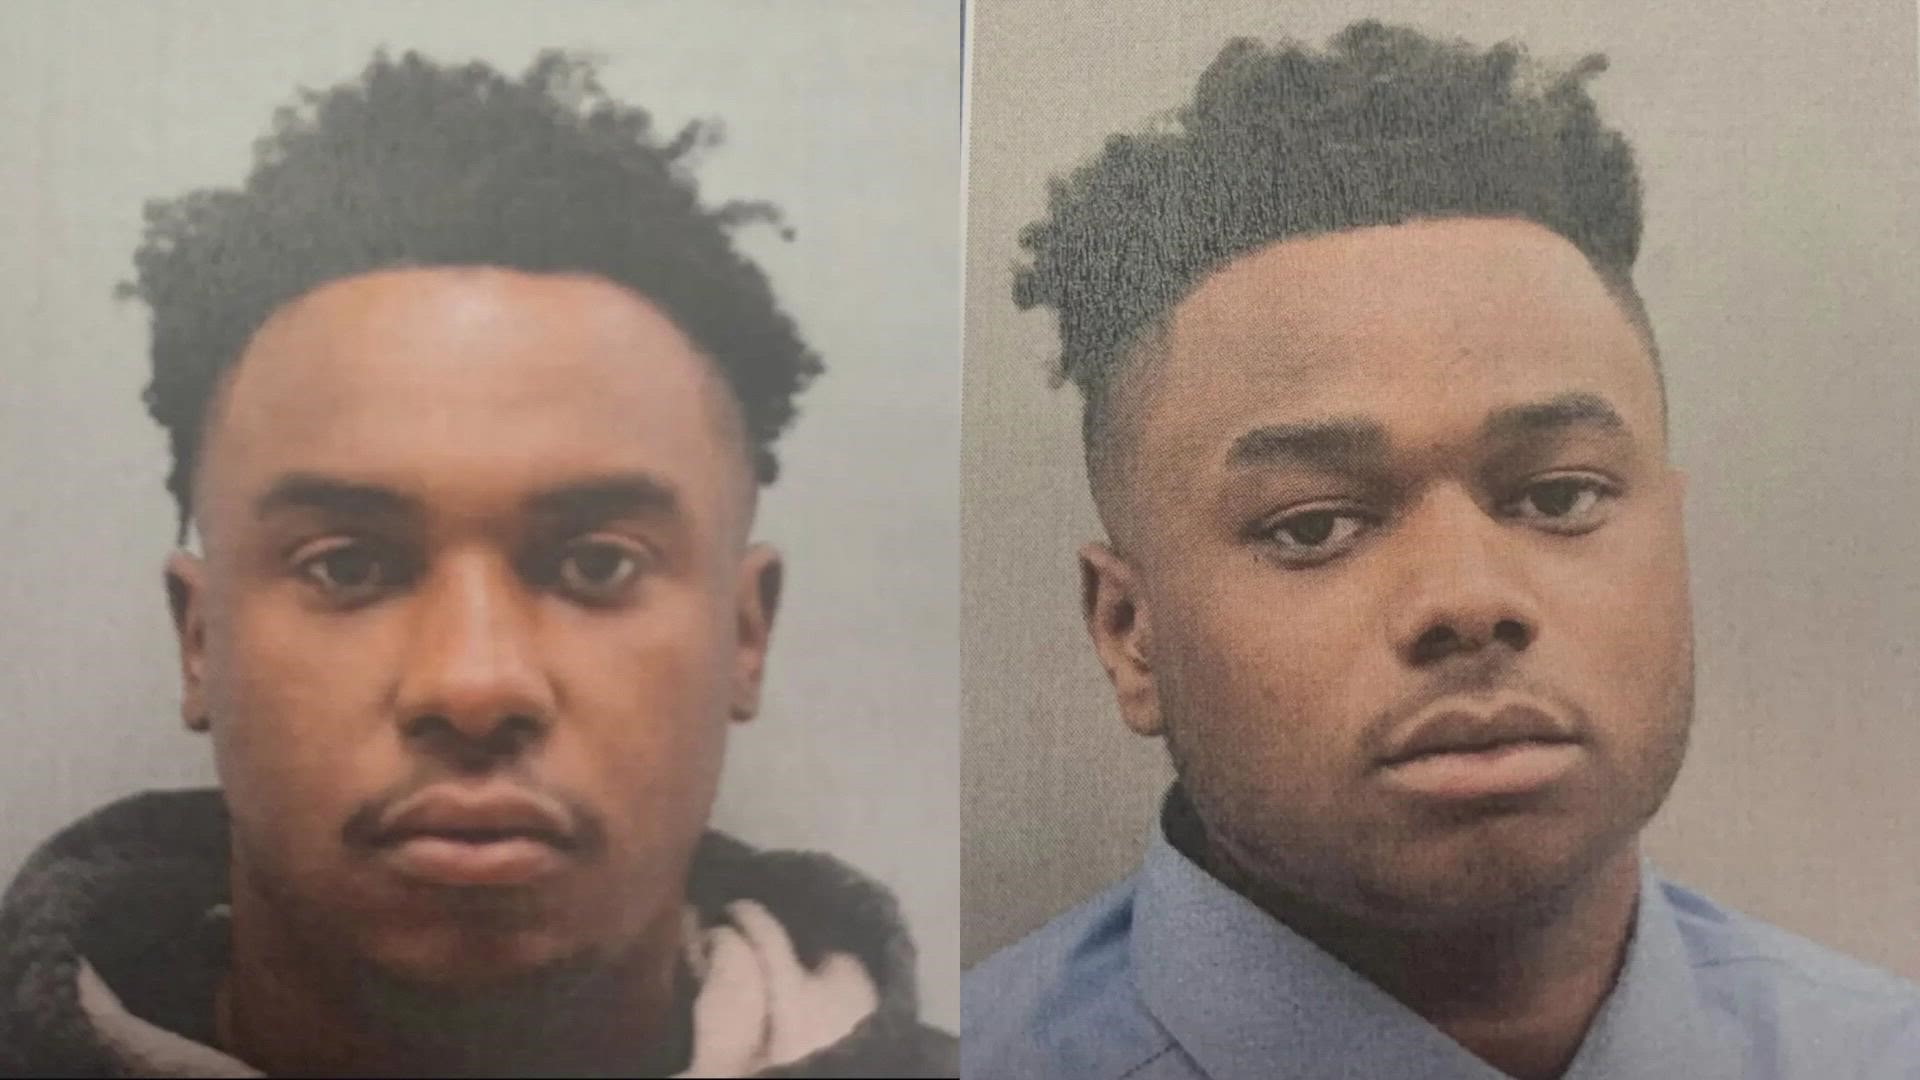 Ahsim Taylor, Jr., 20, and Jayland Womack, 20, have both been charged with murder in this case.  Both men were out on bond stemming from separate murder cases.